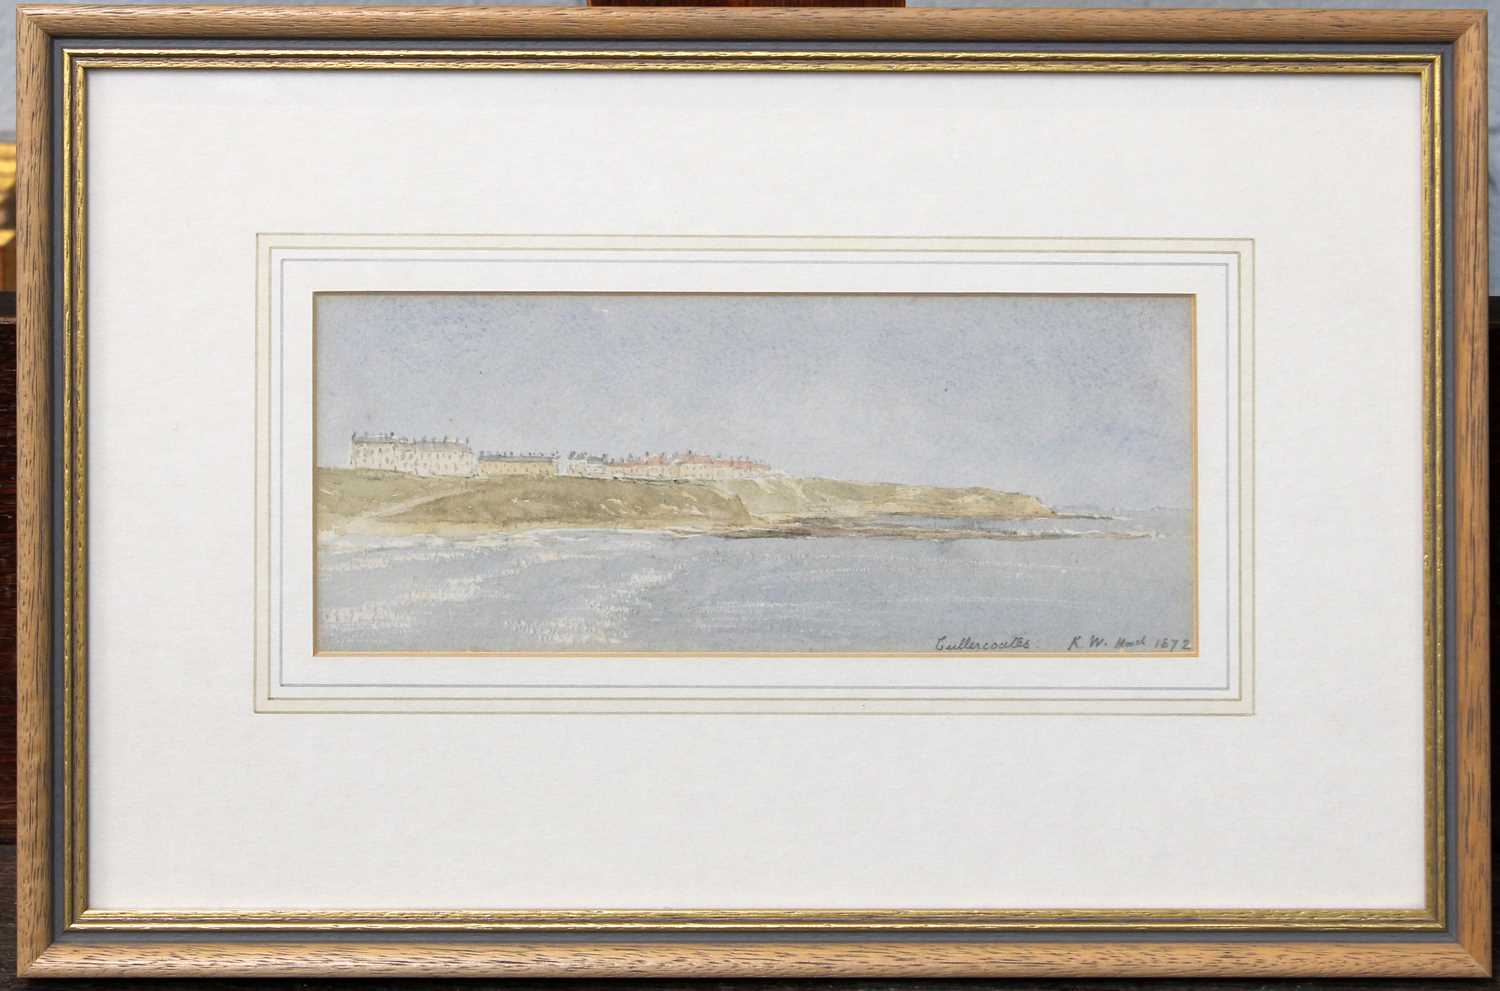 Richard Weatherill (fl. 1870-1900) "Cullercoats" Initialled, inscribed and dated March 1872, - Image 2 of 2